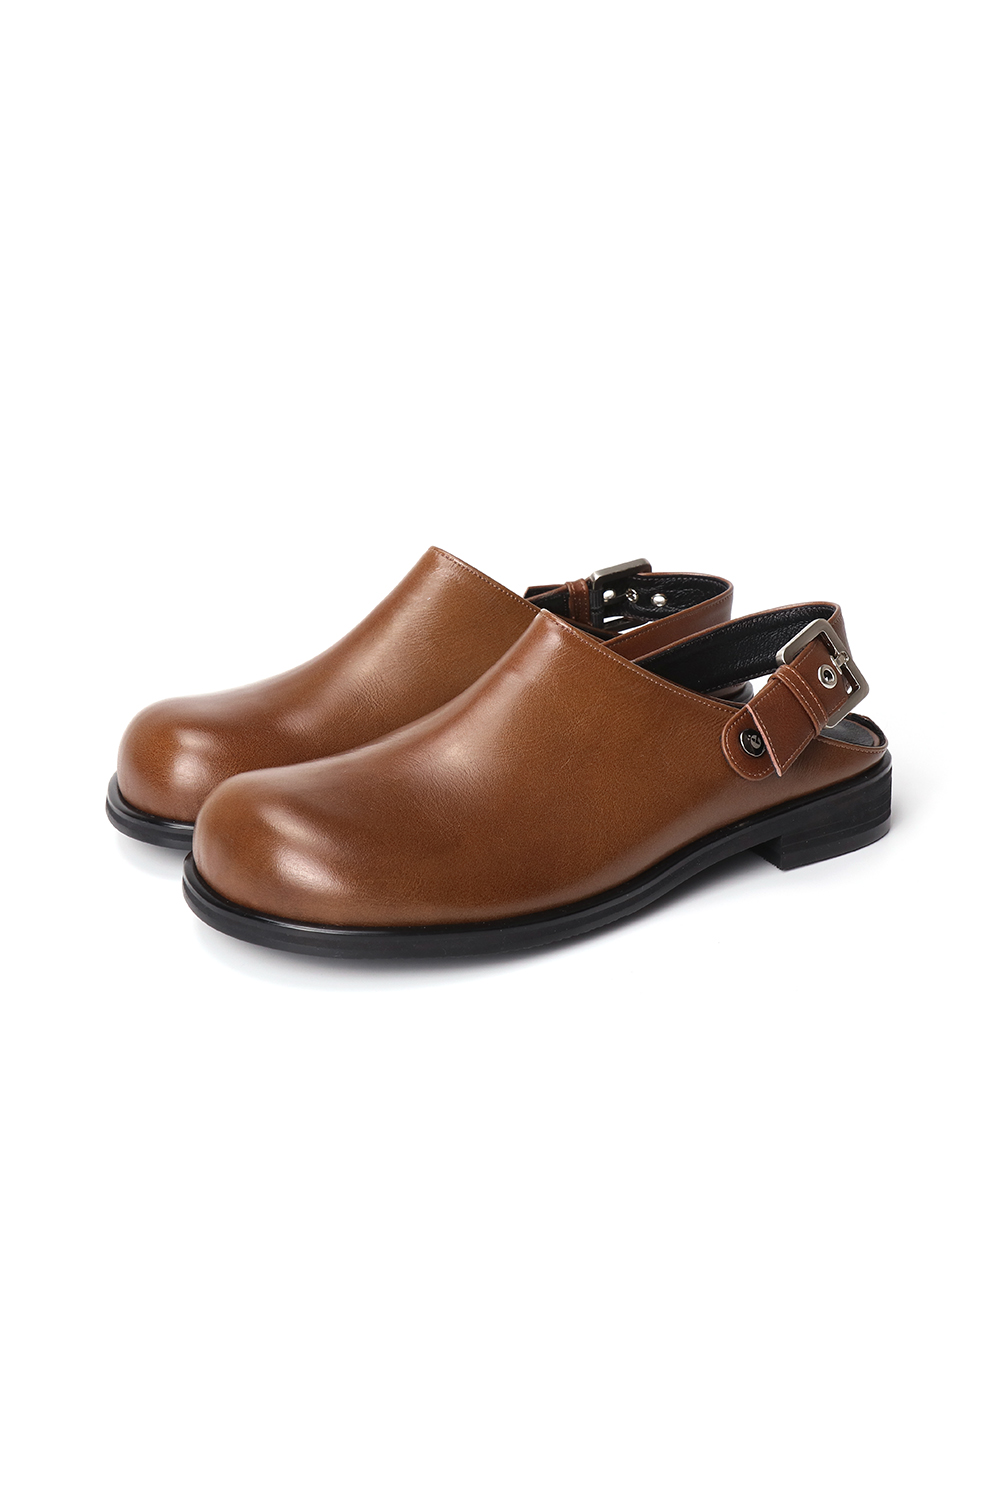 PEZ 2WAY BUCKLE CLOG [WASHED BROWN]